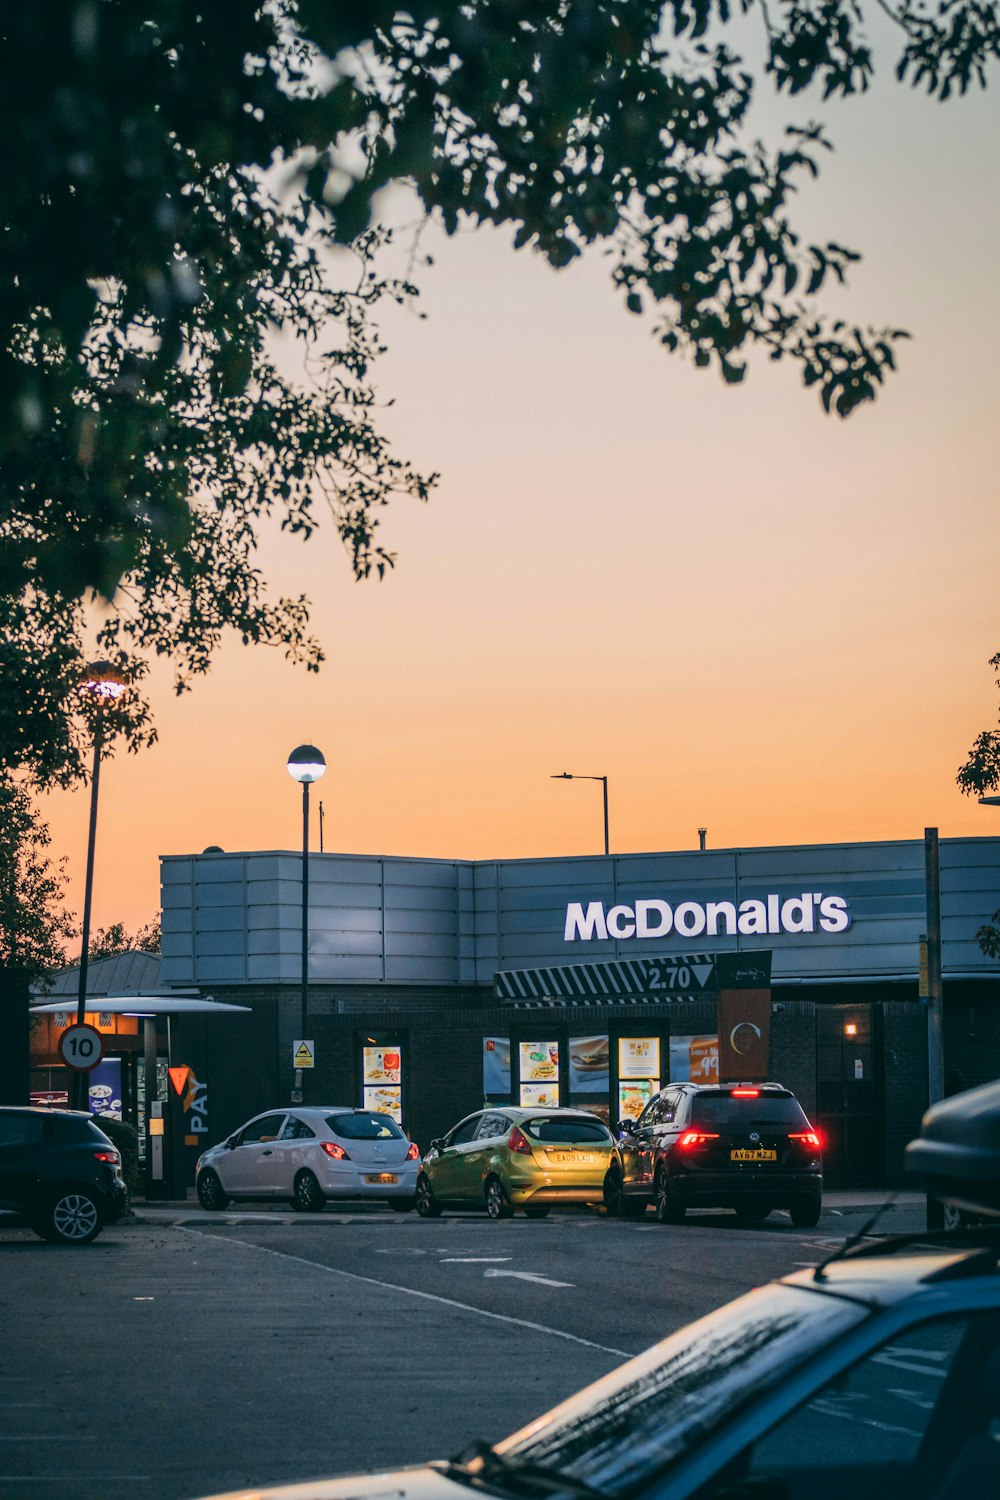 a mcdonald's restaurant with cars parked in front of it